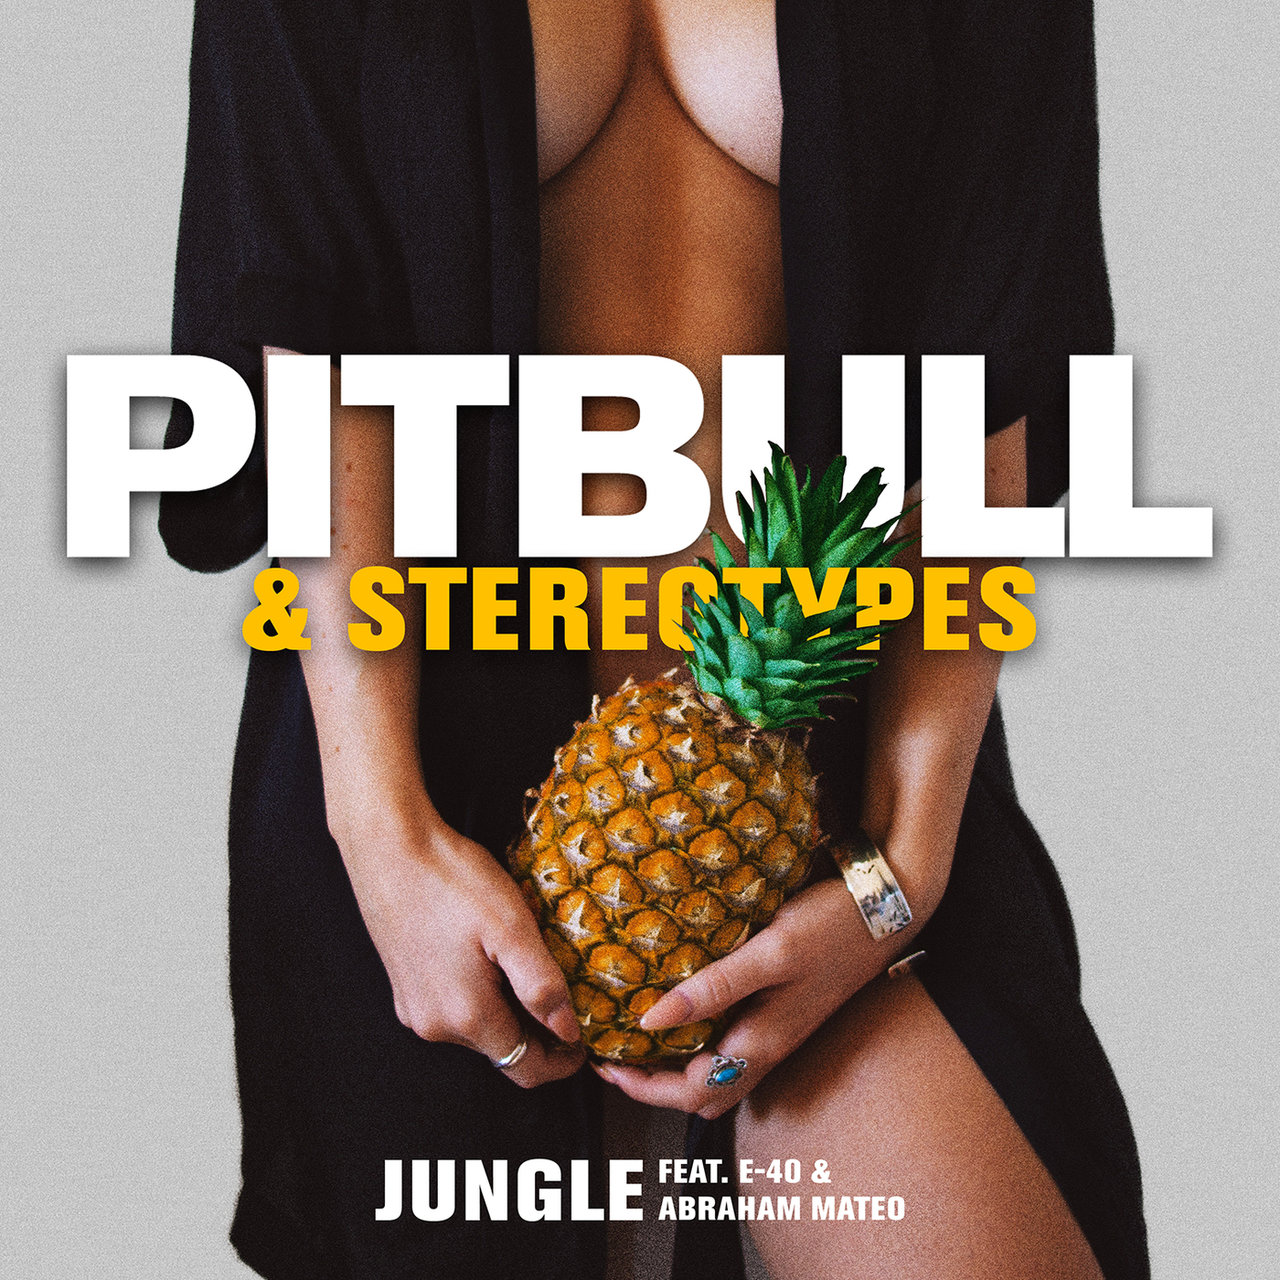 Pitbull & Stereotypes ft. featuring E-40 & Abraham Mateo Jungle cover artwork